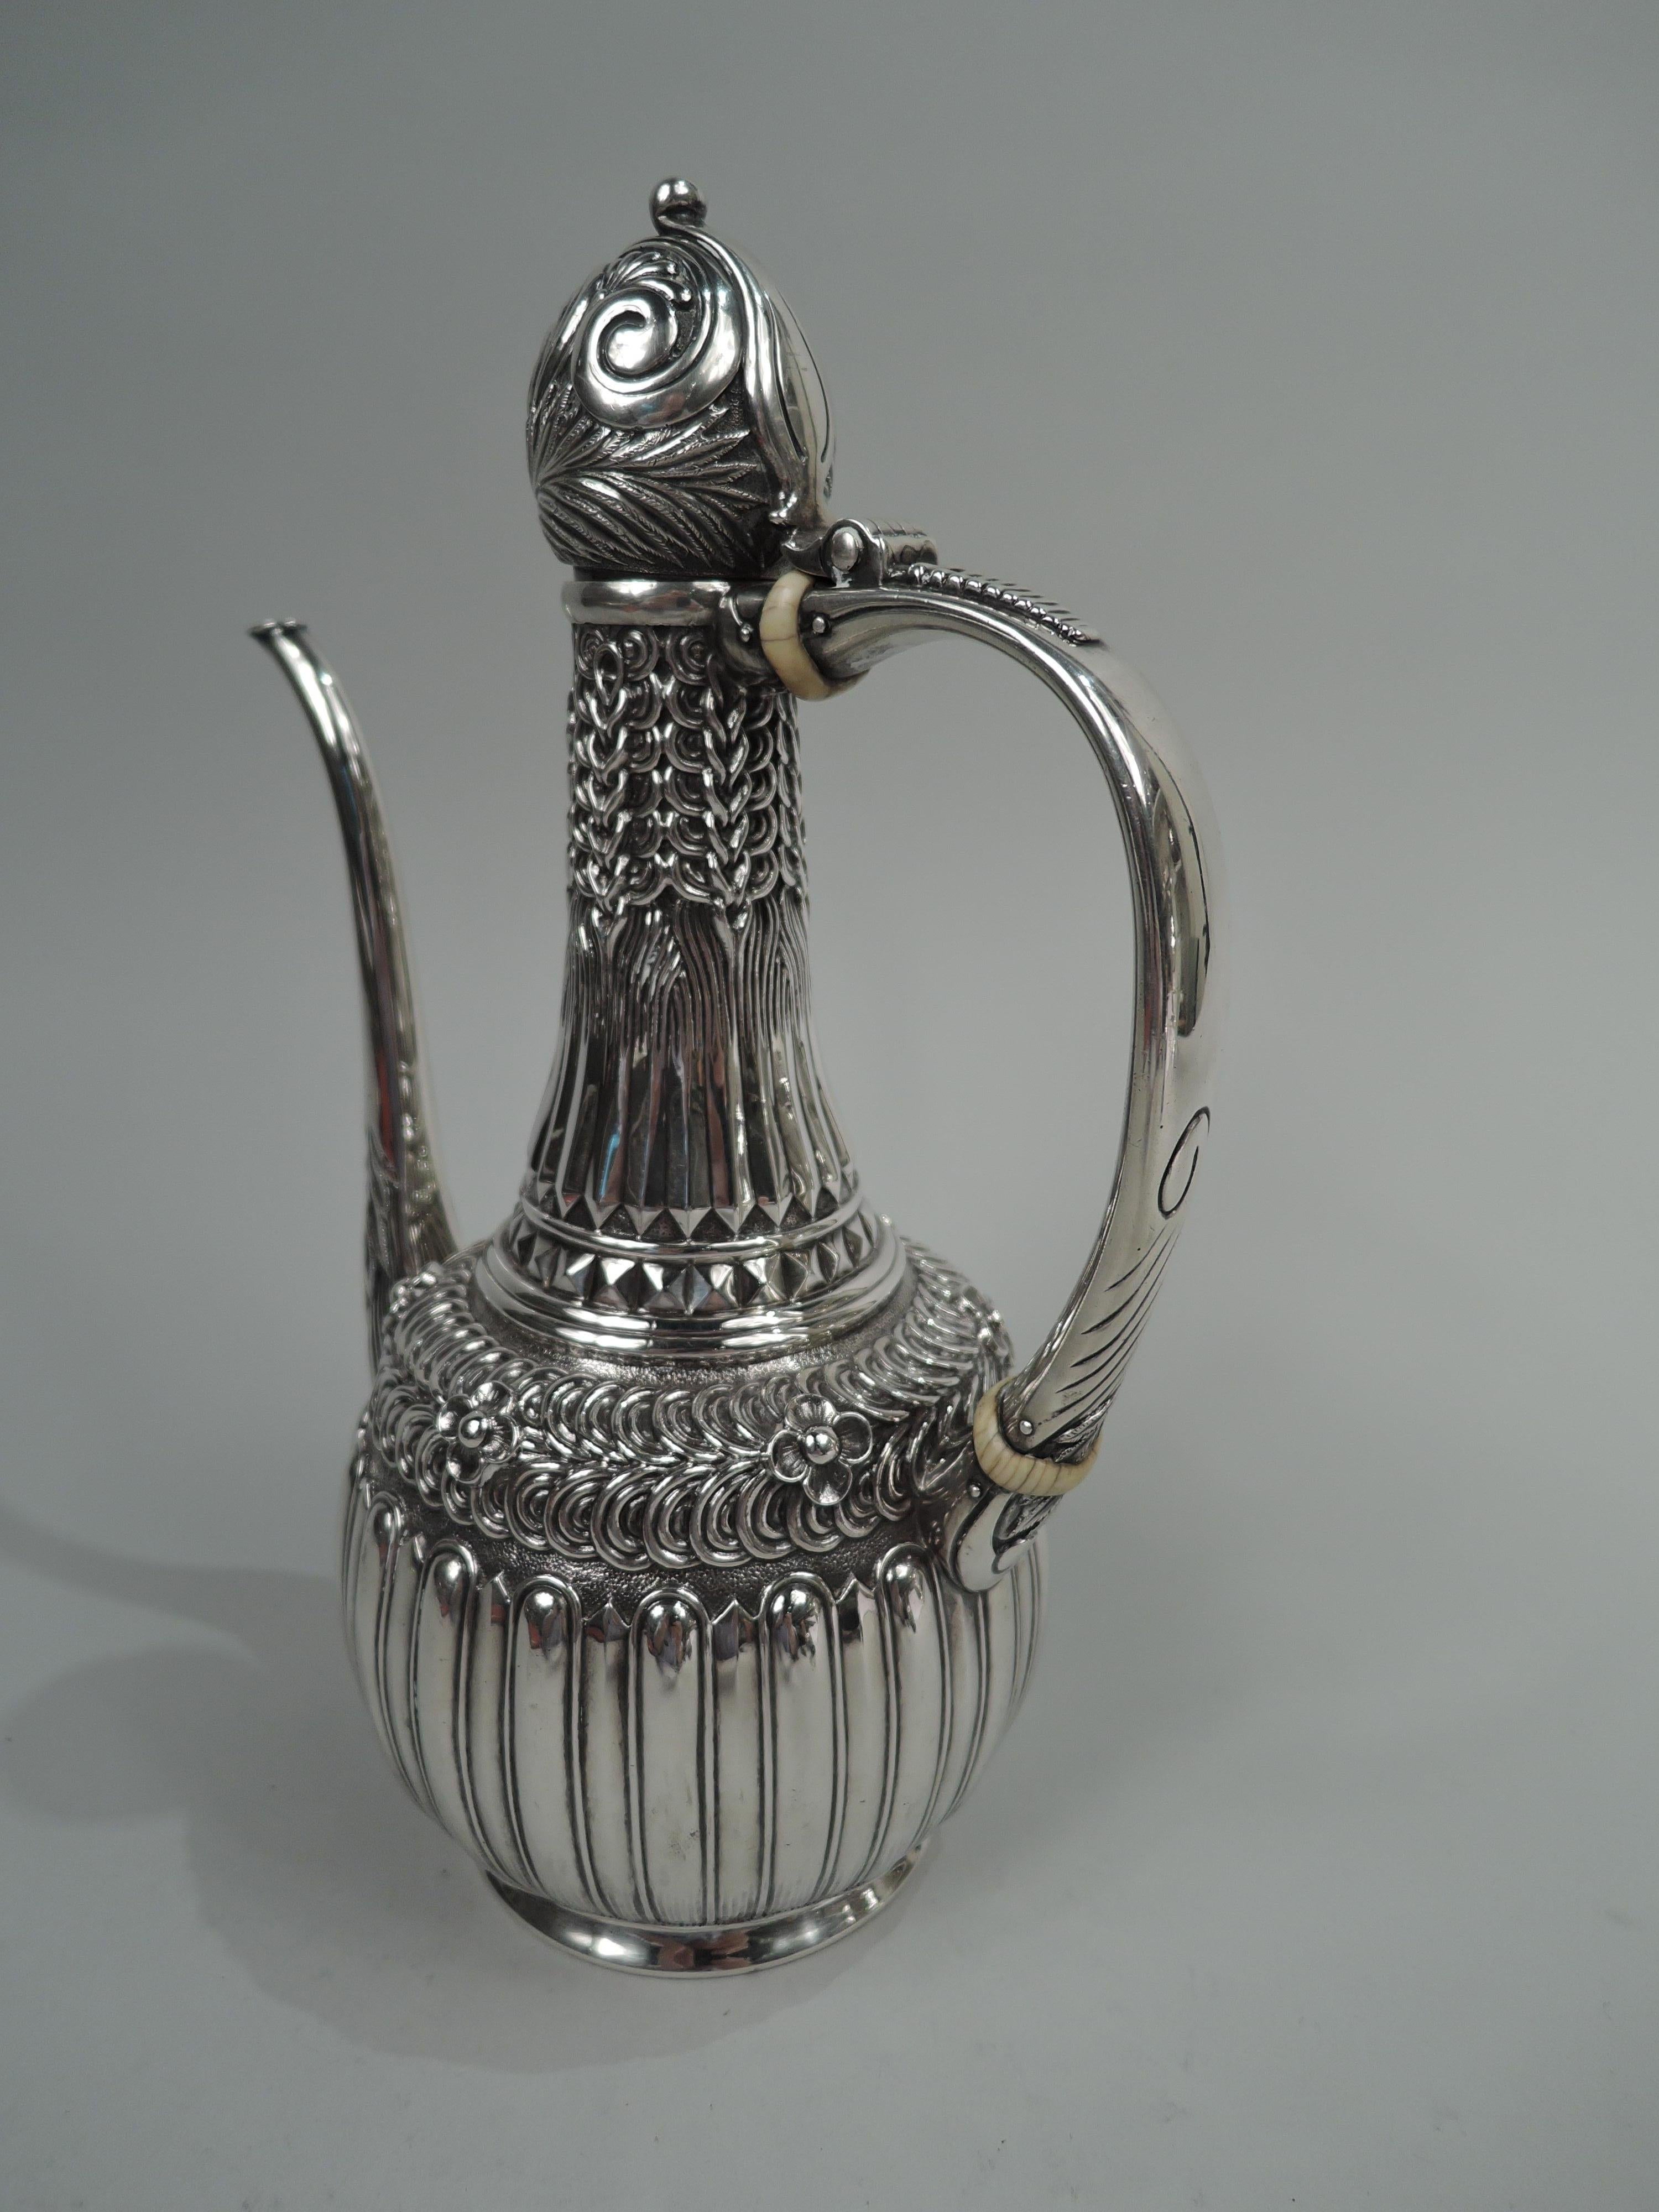 Aesthetic sterling silver Turkish coffeepot. Made by Tiffany & Co. in New York. Upward tapering neck and round bowl. Ball-cover hinge-mounted to c-scroll handle with applied ribbed thumb rest; vertical scrolled spout. Chased and embossed Classical